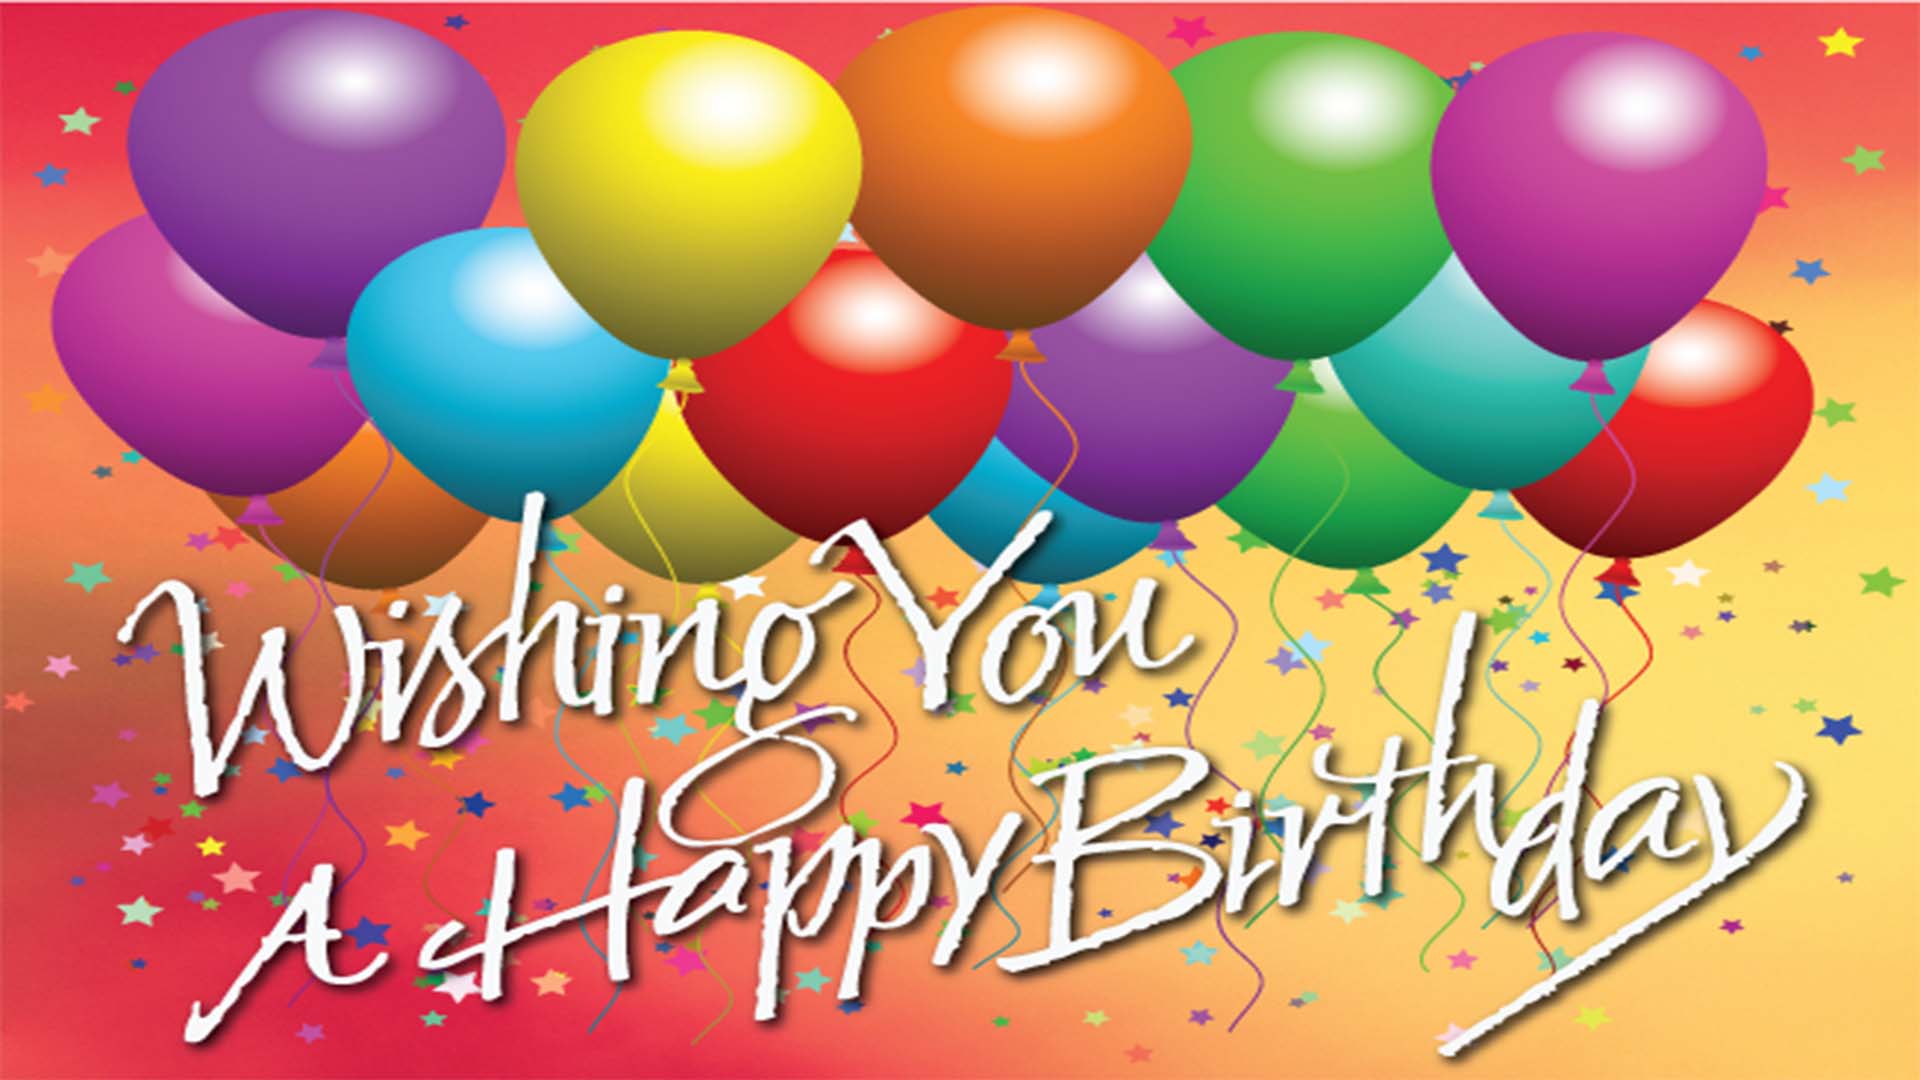 wishes for birthday image hd